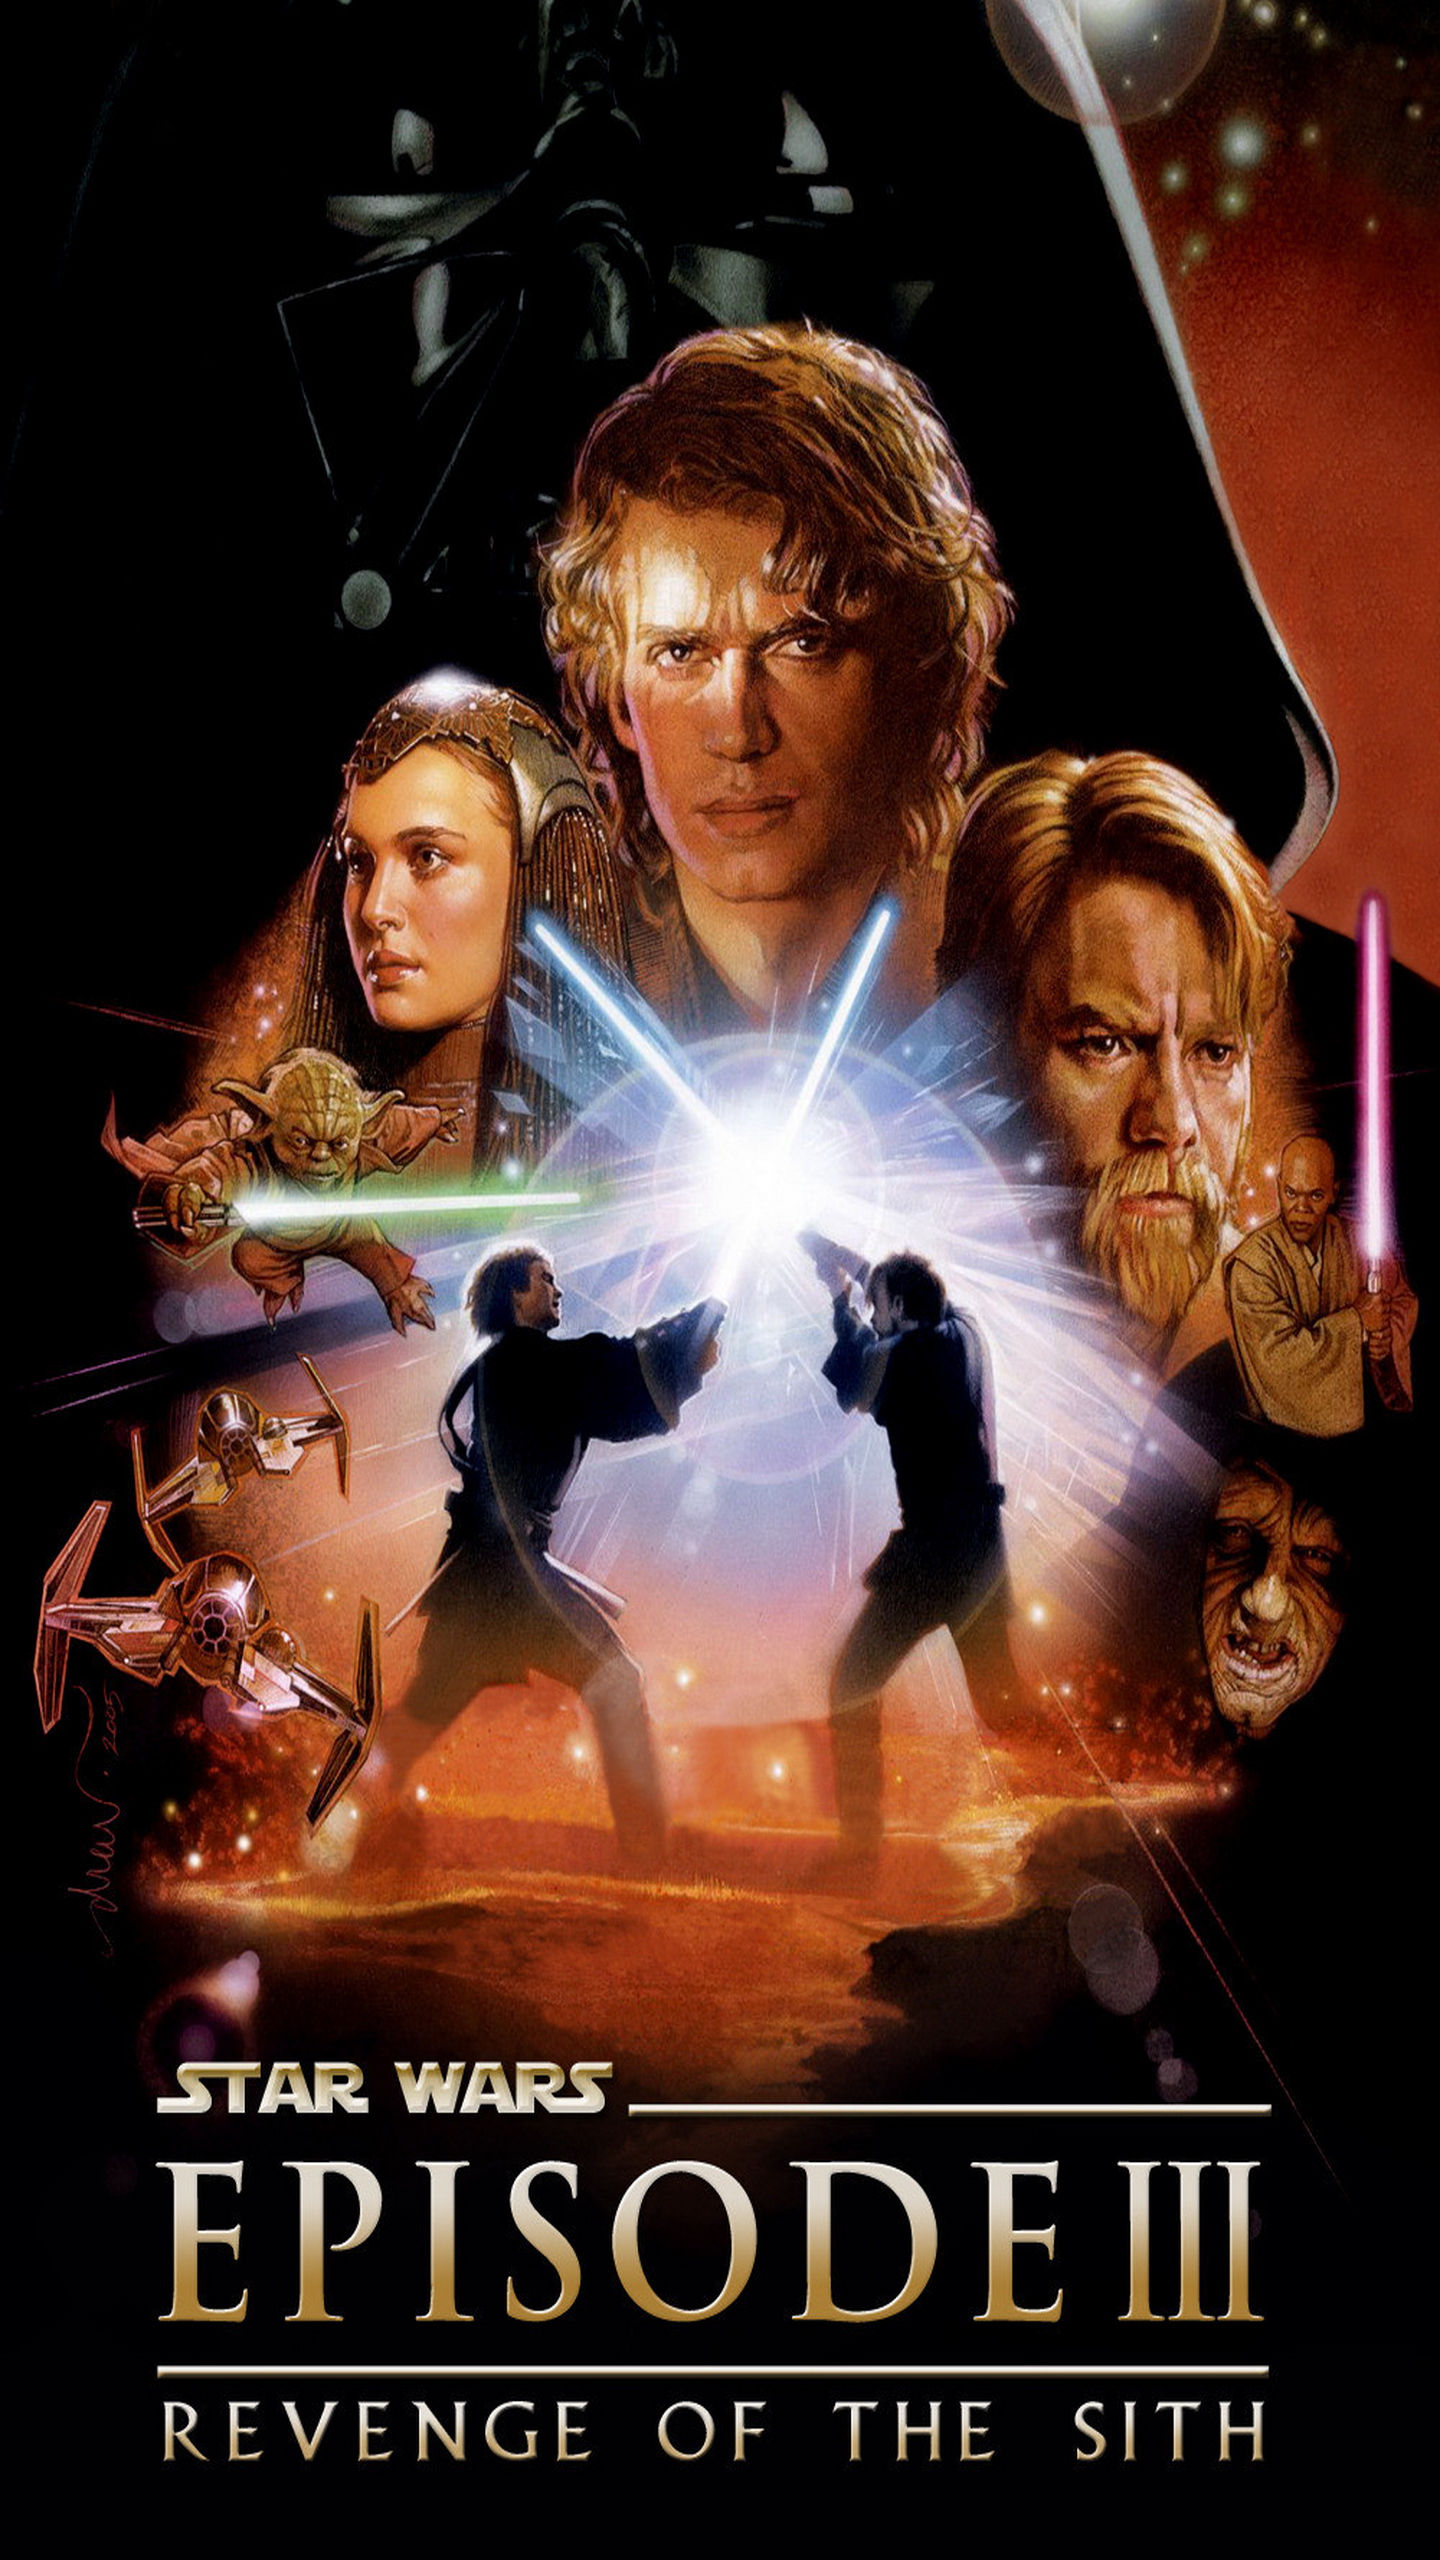 Star Wars Episode Iii Revenge Of The Sith Galaxy Note Wallpaper